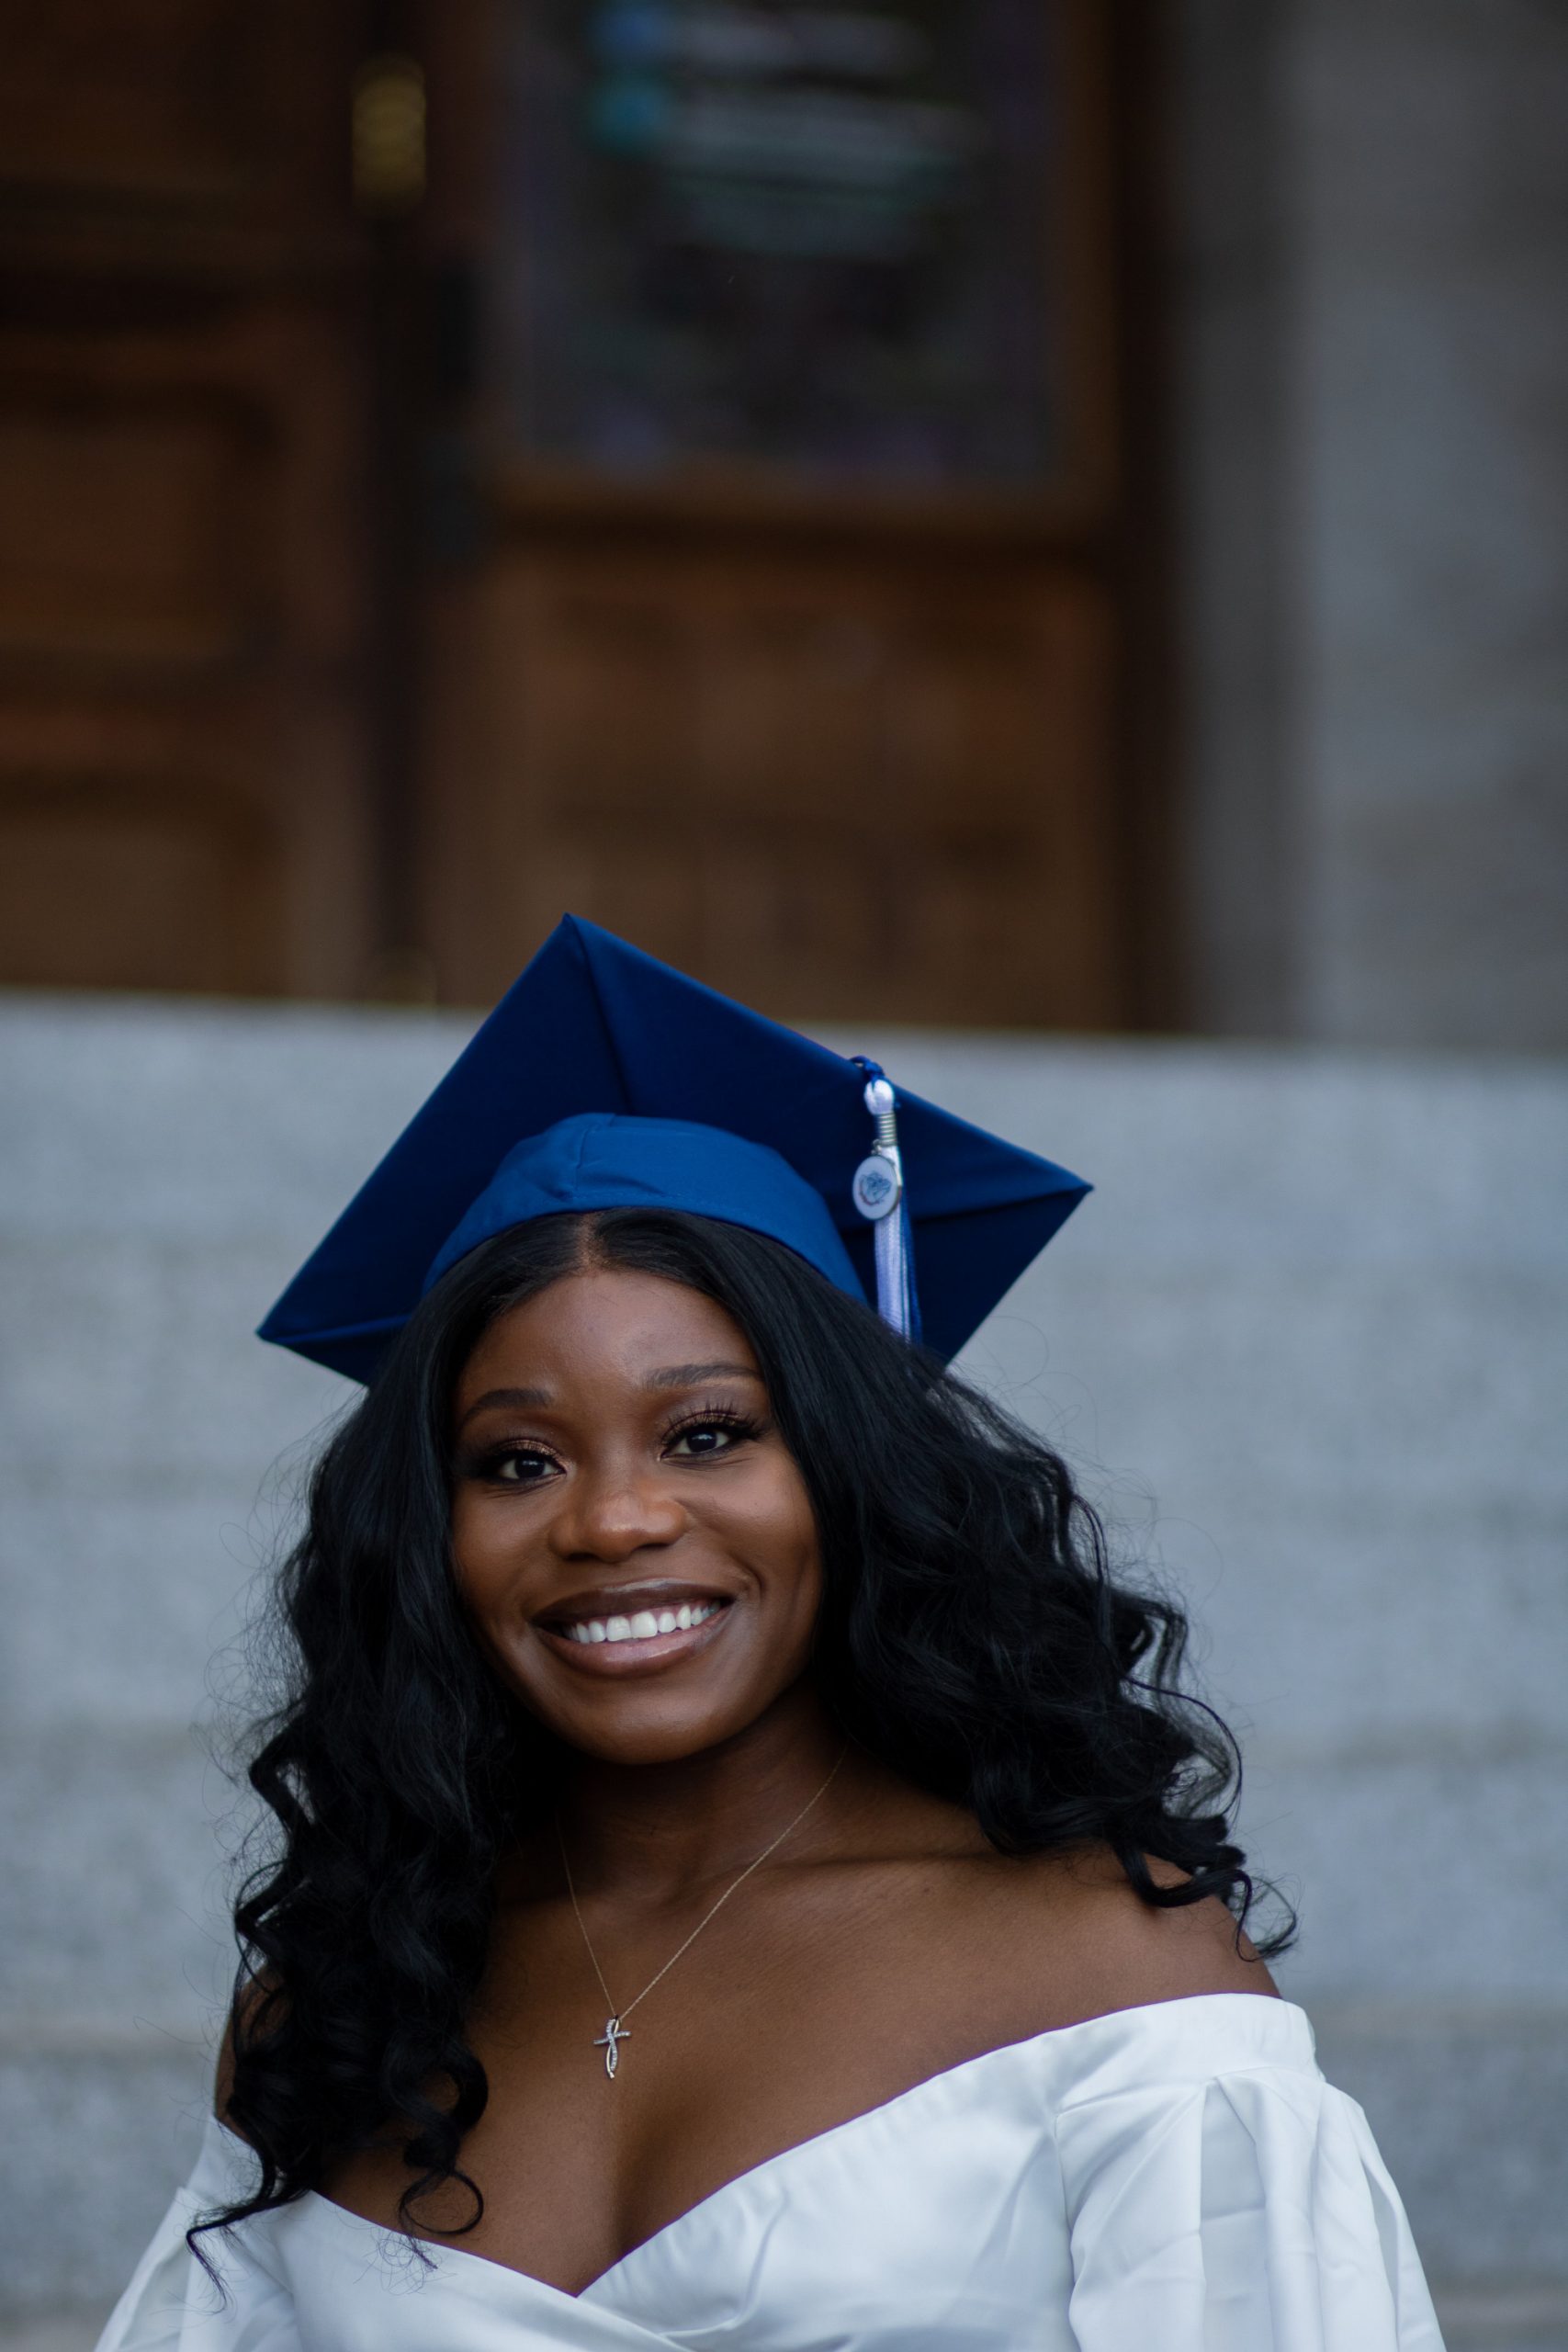 Woman smiling in front of University building with graudation cap and gown on.